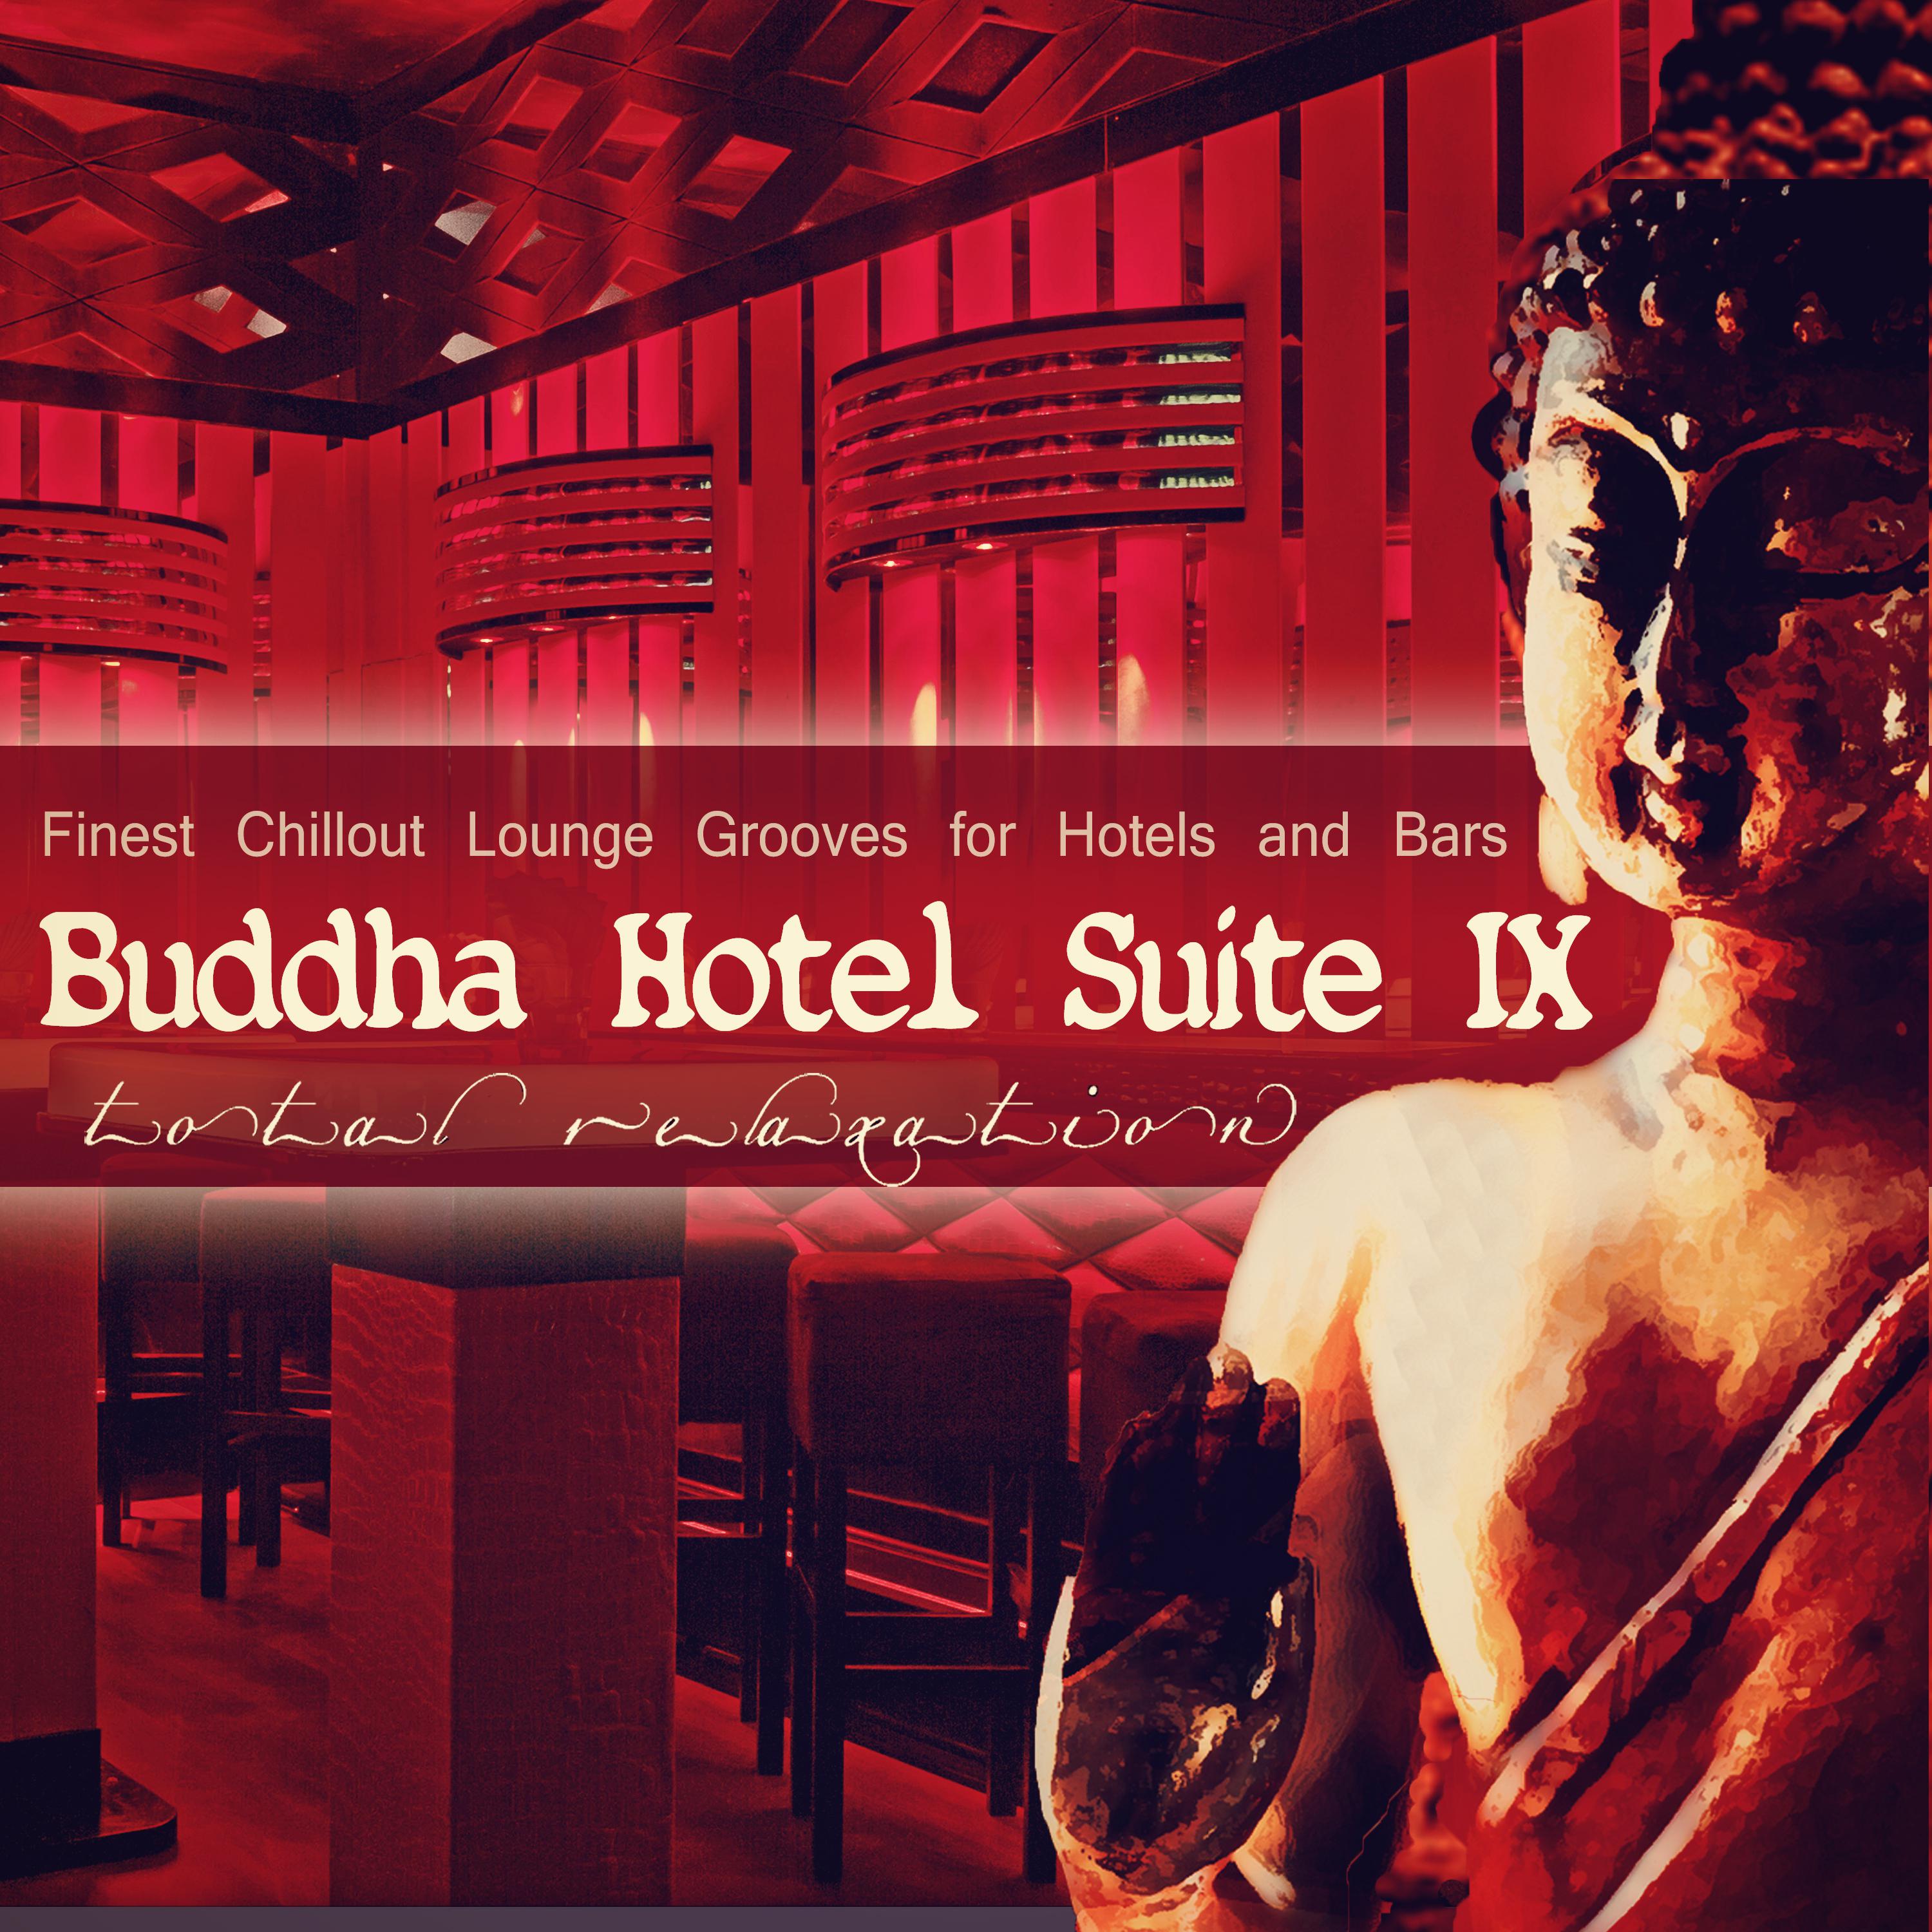 Buddha Hotel Suite 9 - Finest Chillout Lounge Grooves for Hotels and Bars